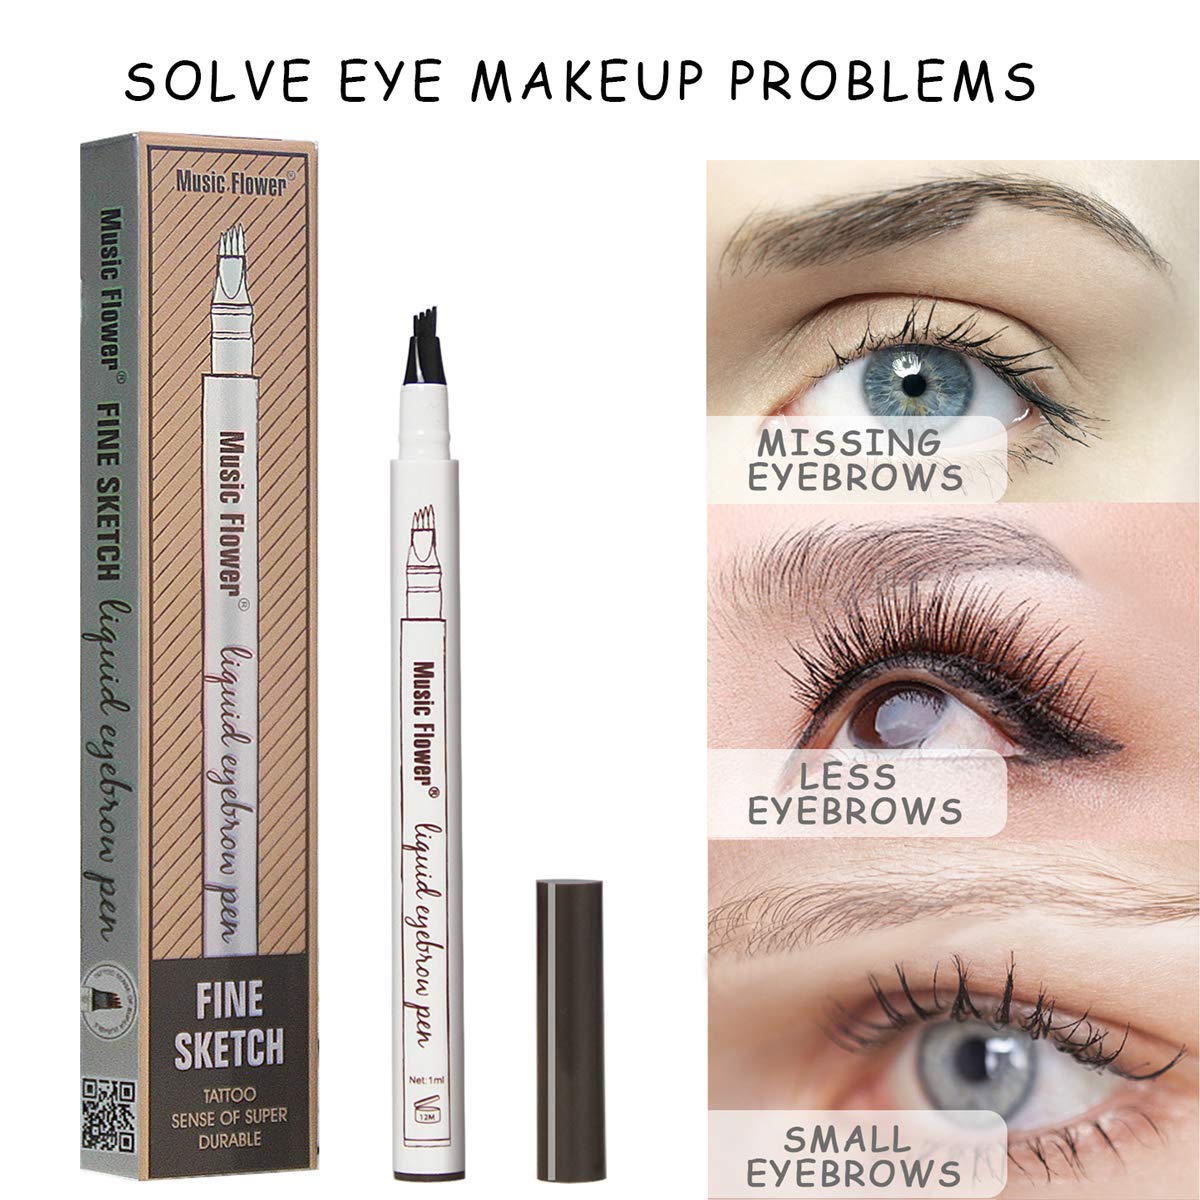 Eye makeup problems that microblading eyebrow pencil can solve